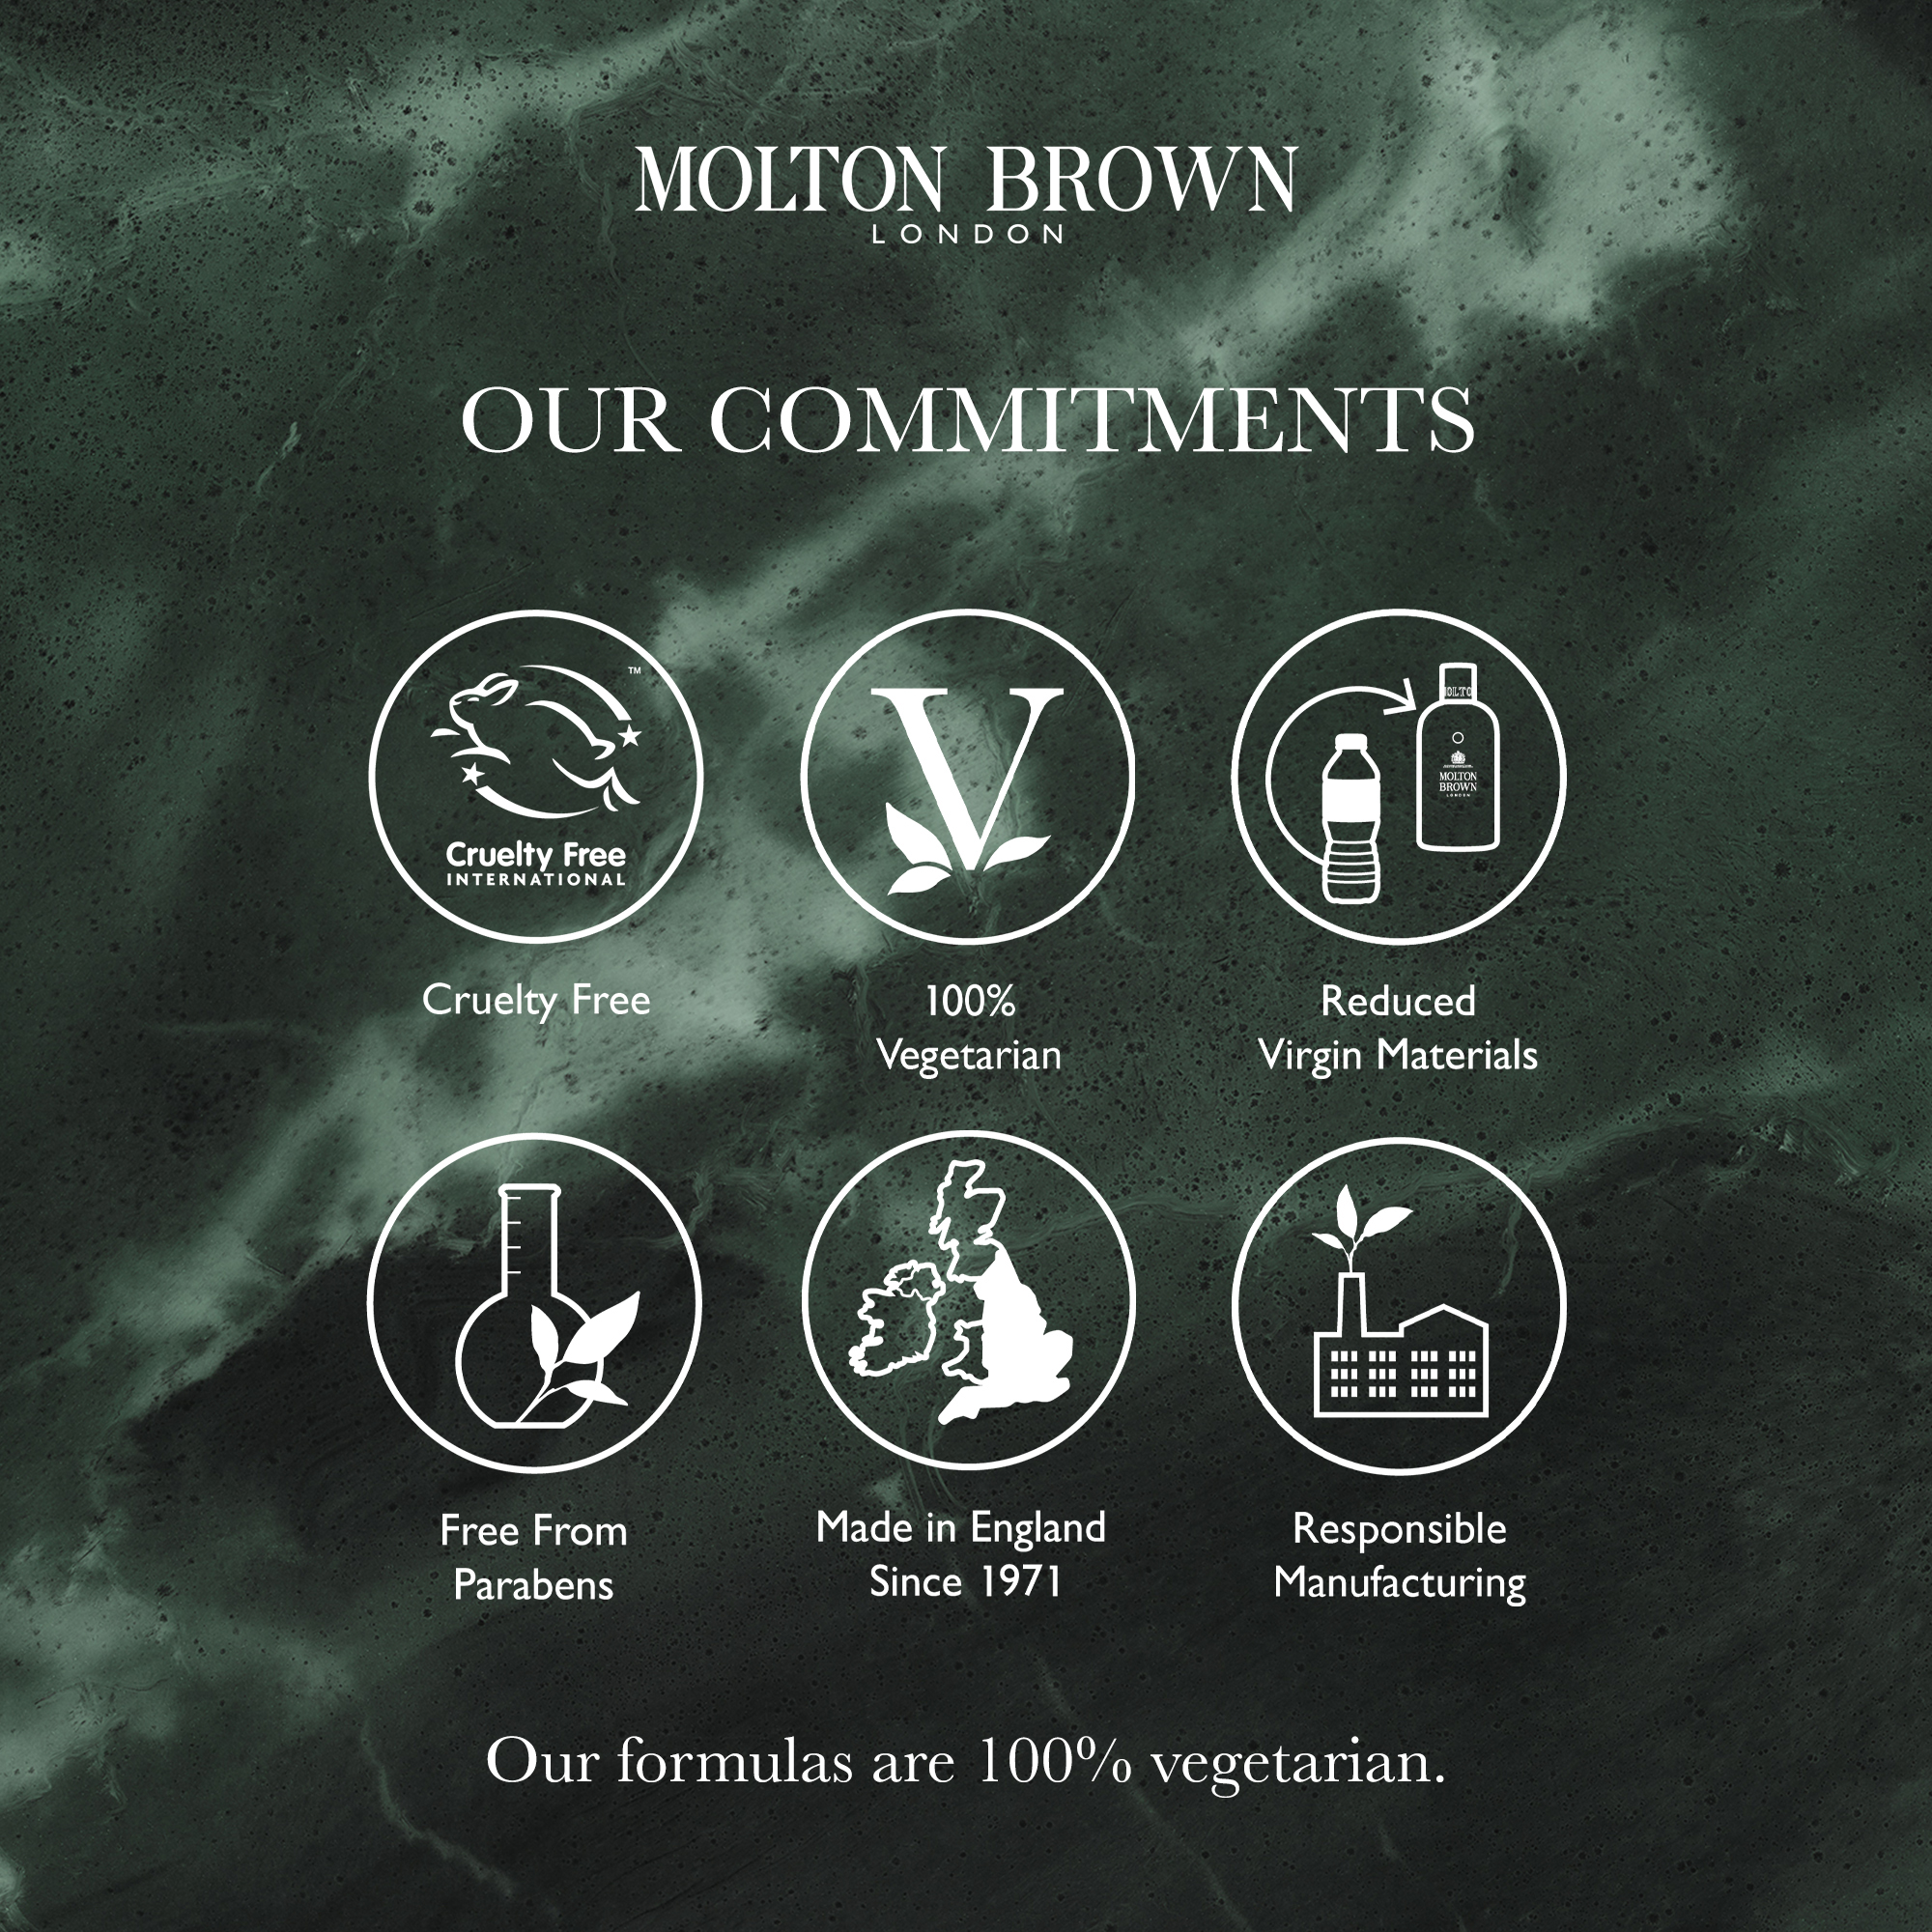 Our Commitments - cruelty free, 100% vegetarian, reduced virgin materials, free from parabens, made in England Since 1971, Responsible manufacturing